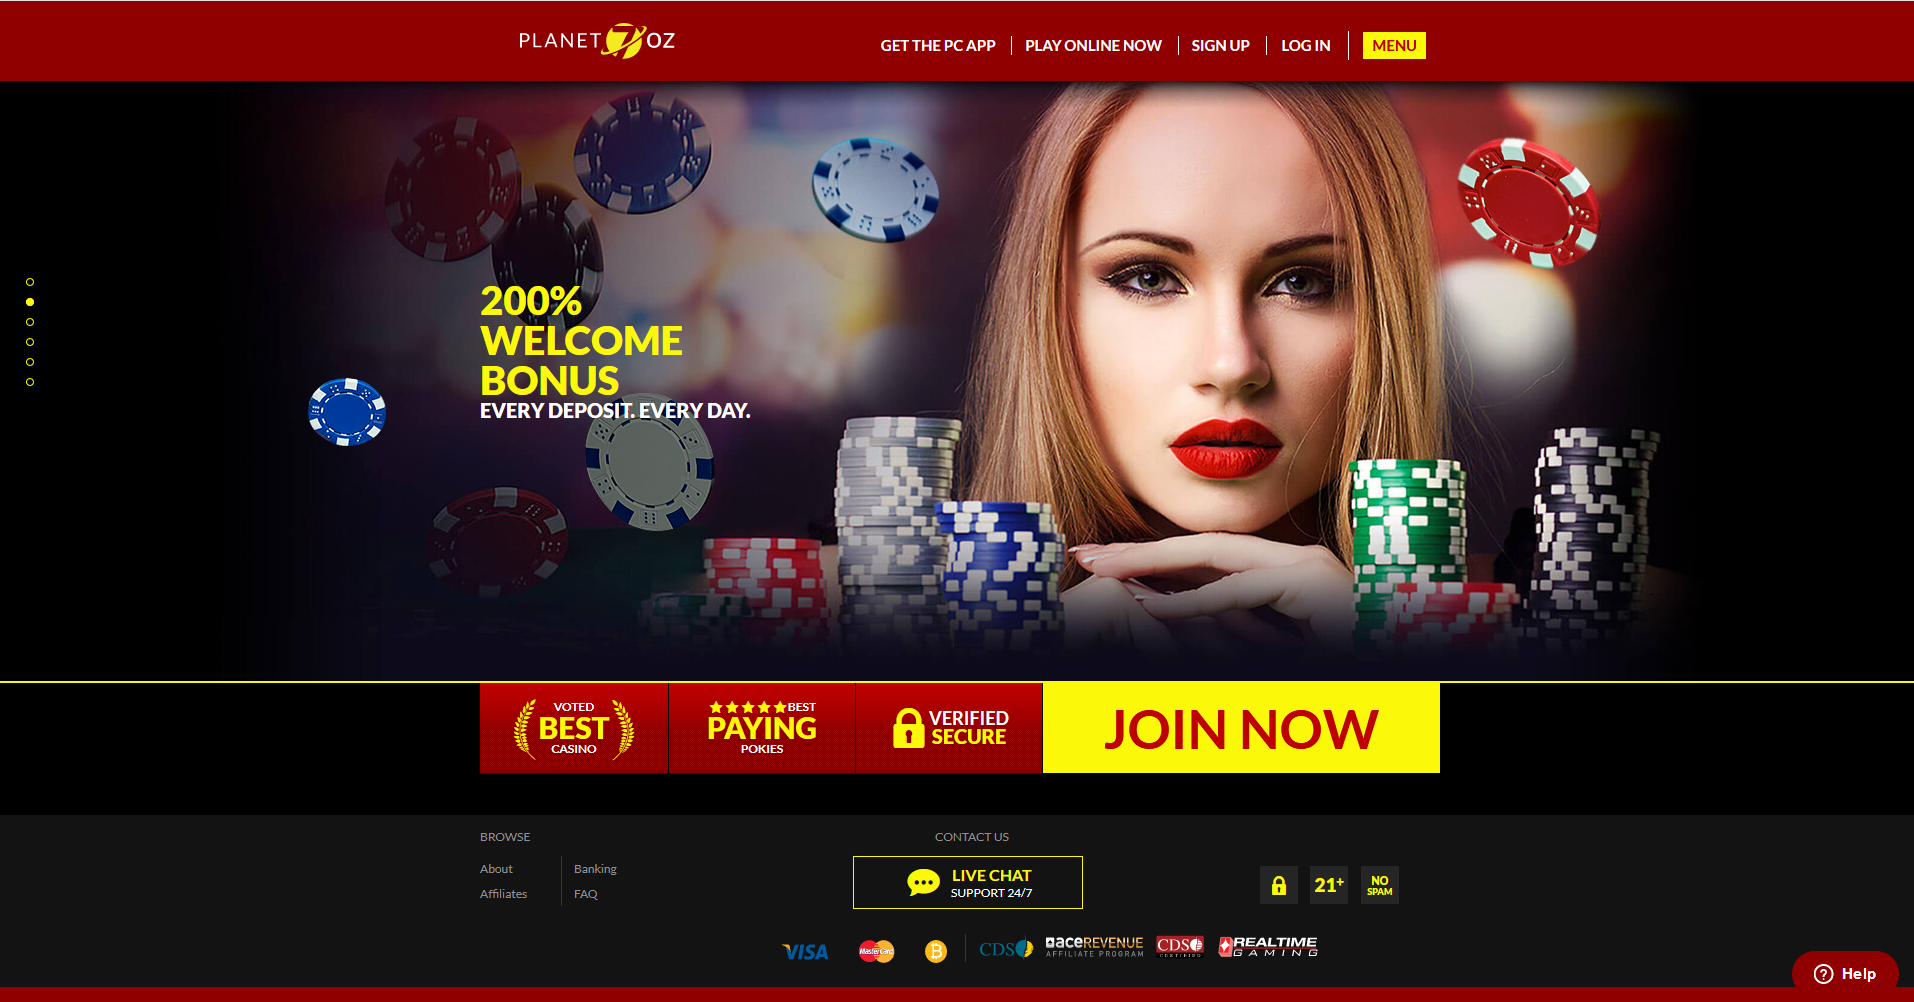 A Beginner's Guide to Winning Big at Planet 7 Casino